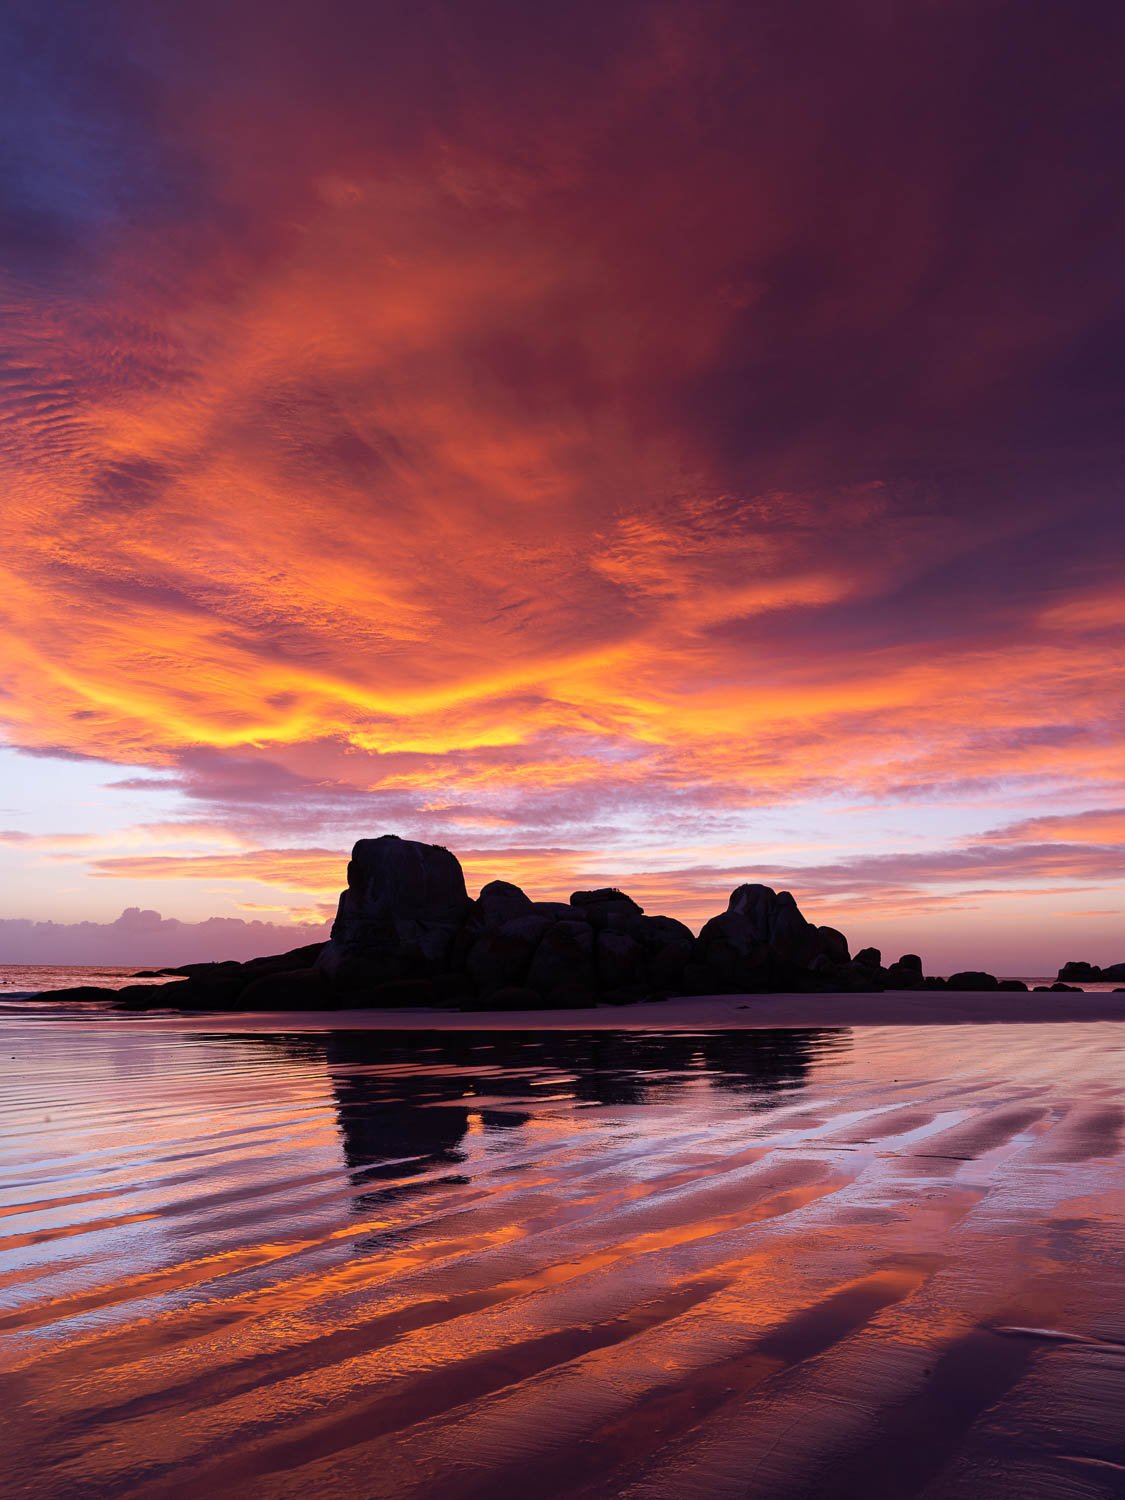 Dark mountains with a dense orangish and reddish effect of clouds over, Picnic Rocks sunrise, Bay of Fires